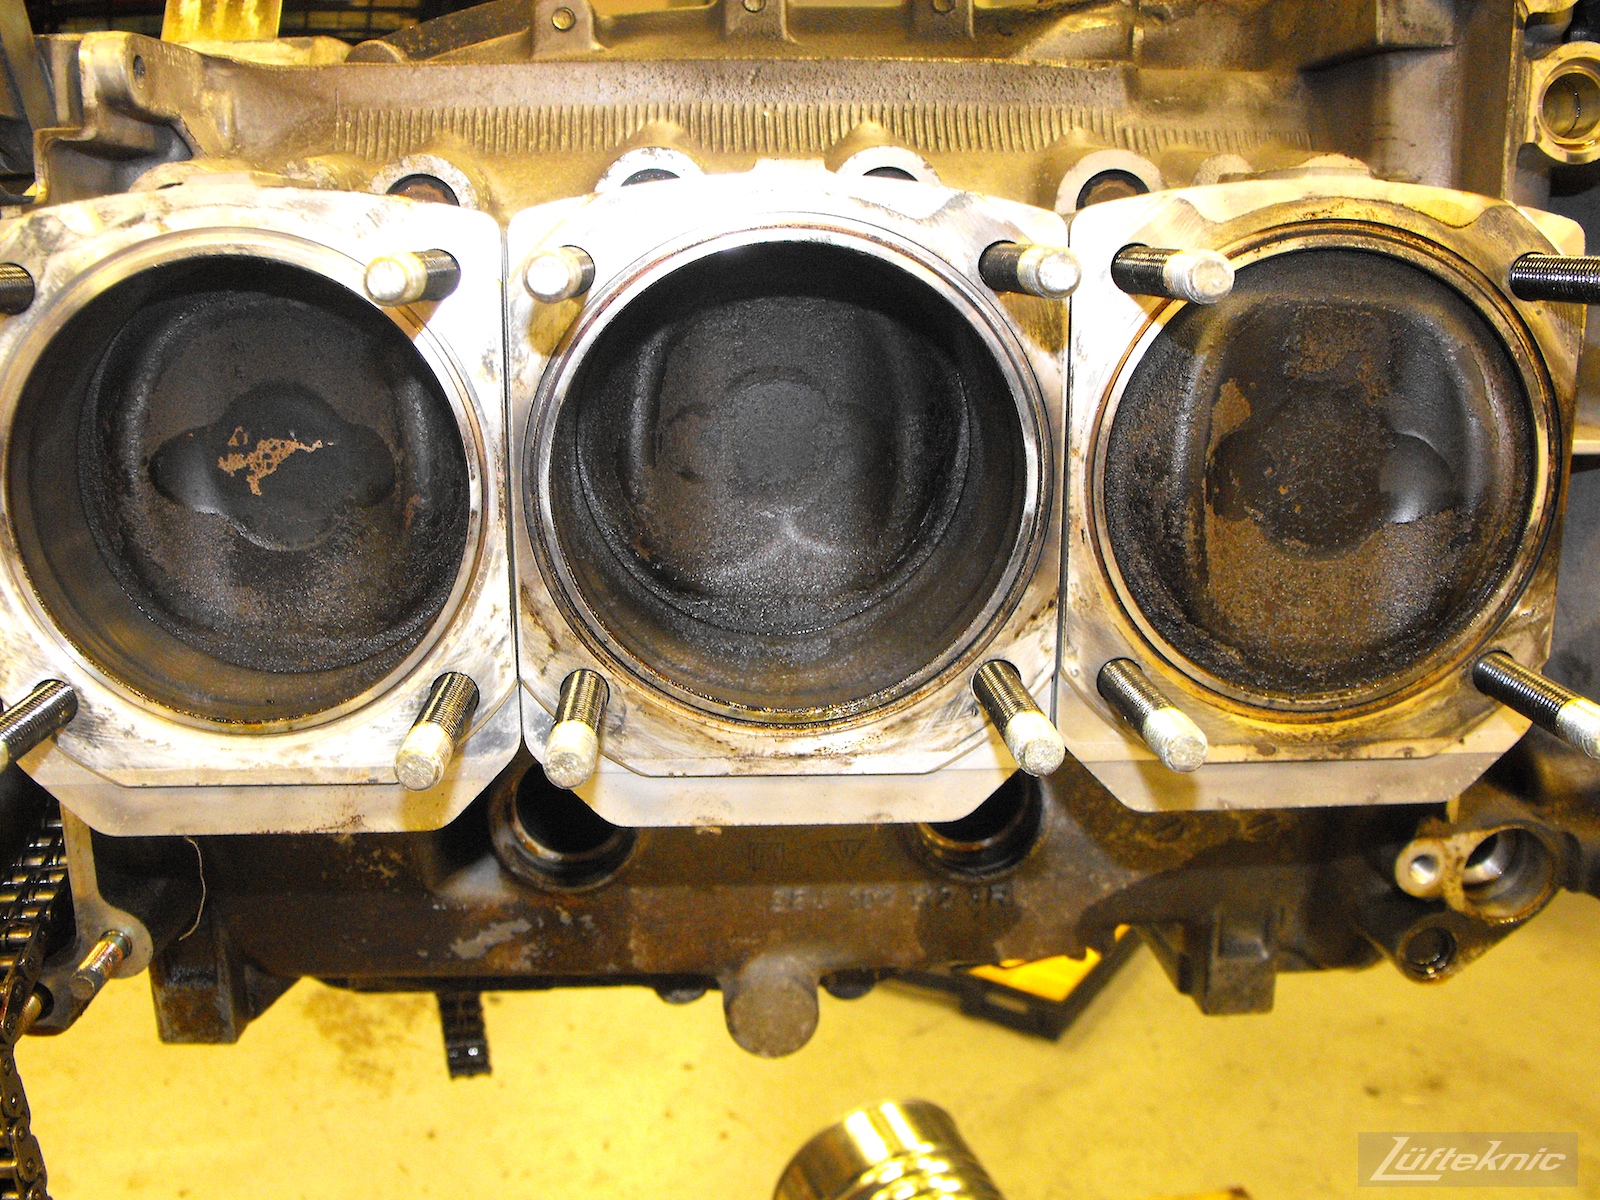 Carbon build up on top of pistons on a 993 Turbo